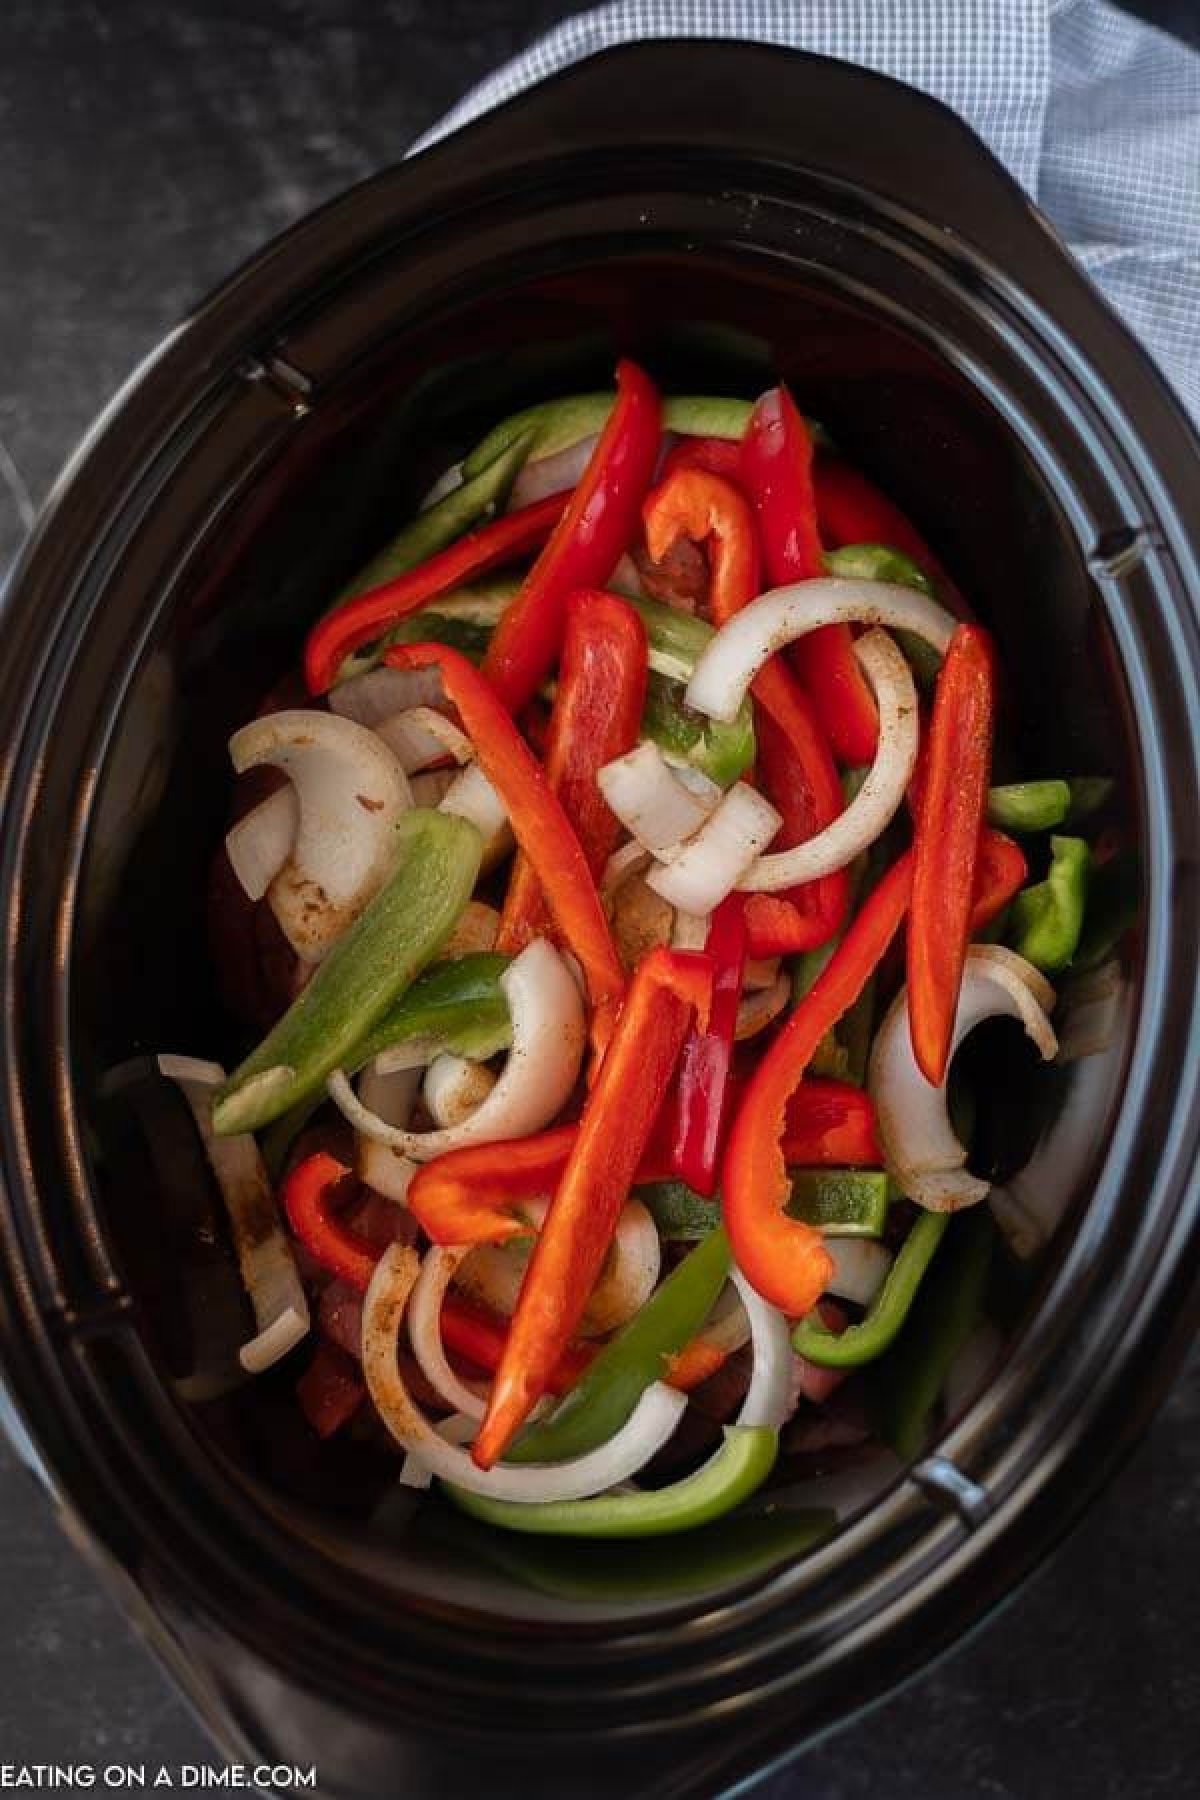 The beef, sliced onions, sliced bell peppers and seasonings in the crock pot.  